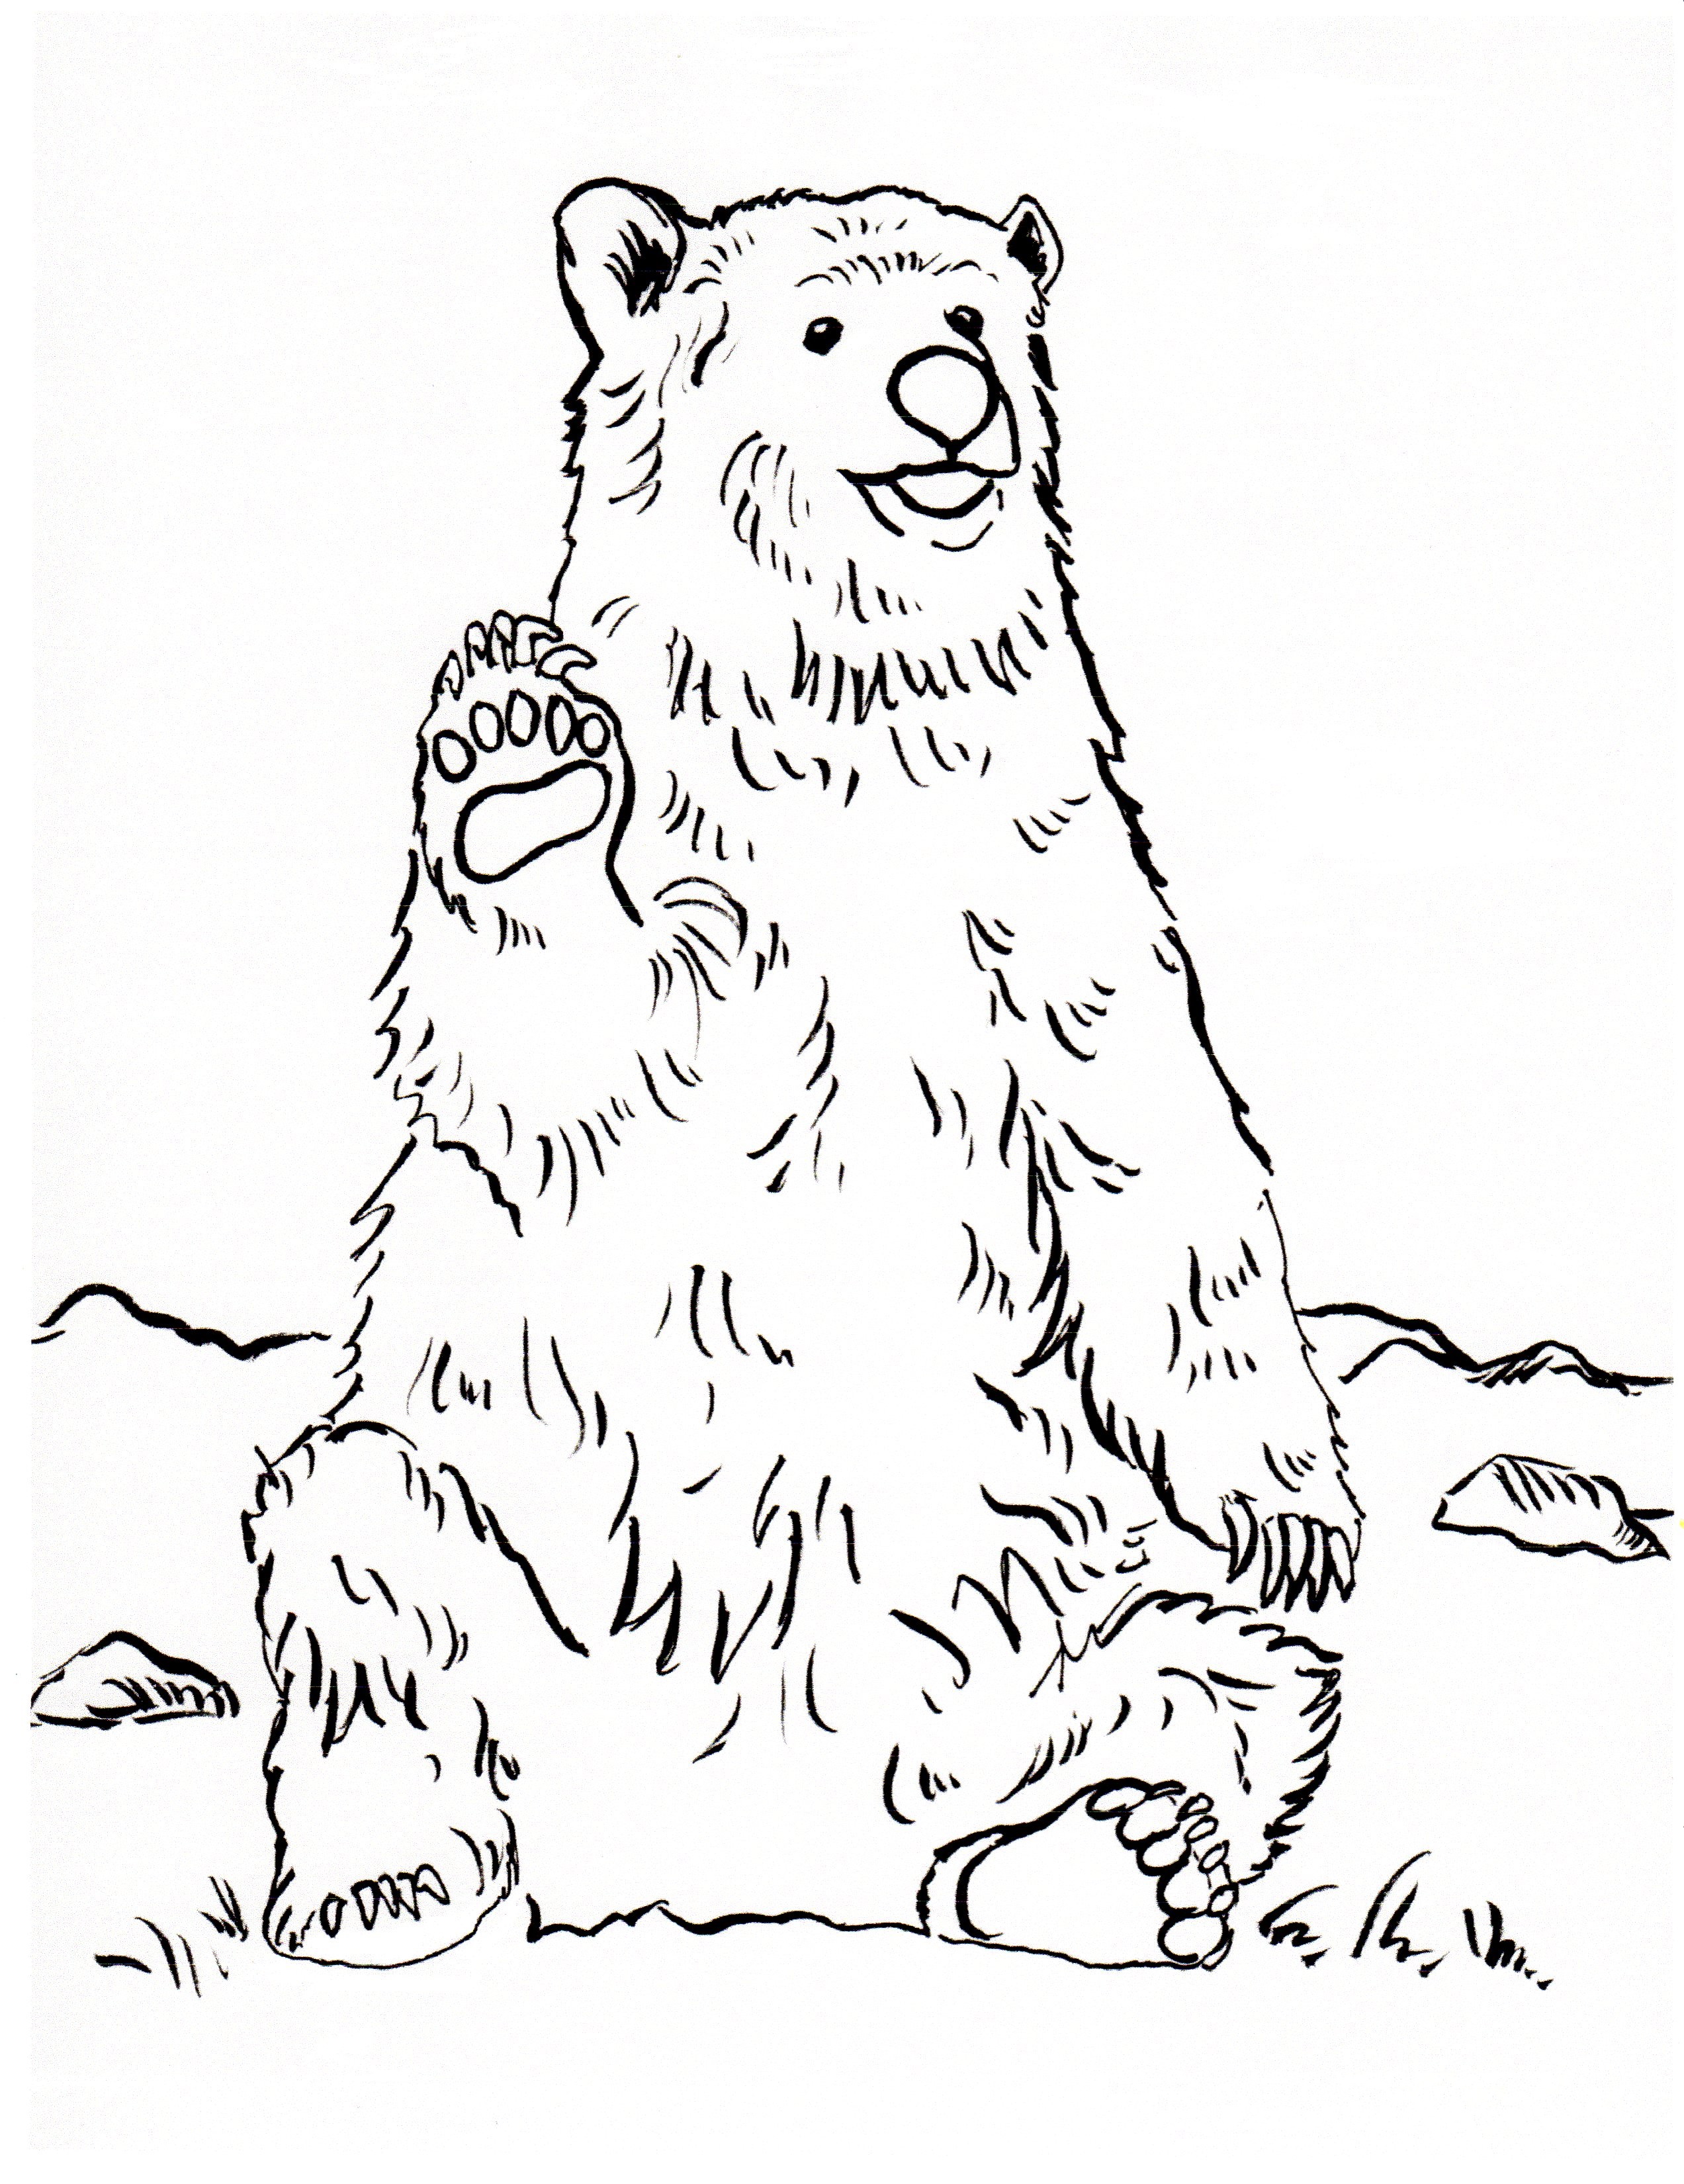 grizzly-bear-coloring-page-art-starts